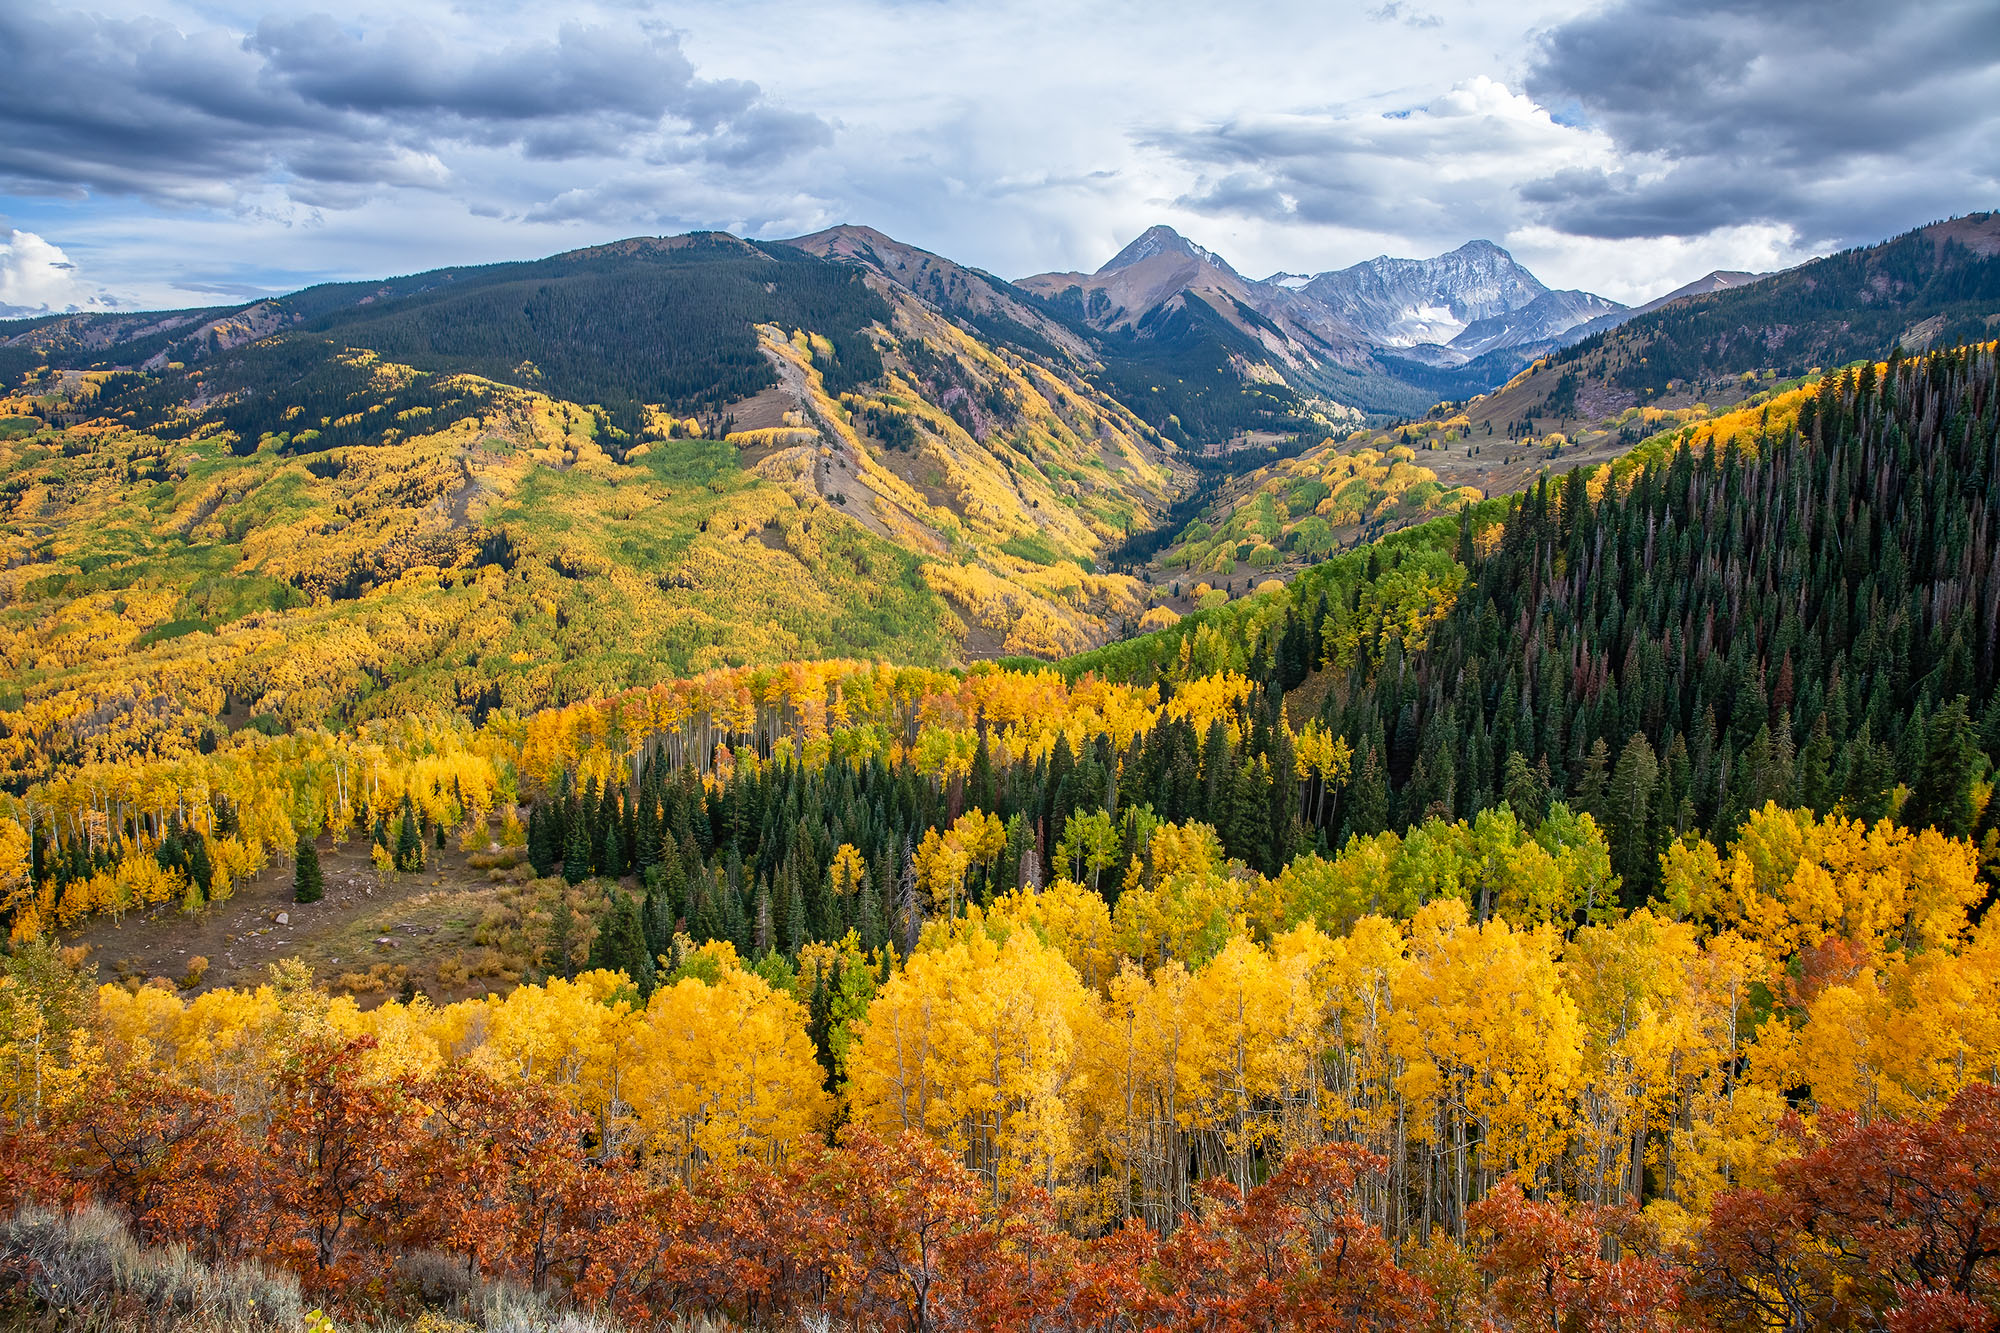 This image, captured during the vibrant fall season in Colorado, unveils the grandeur of Capitol Peak. Amidst a series of valleys...